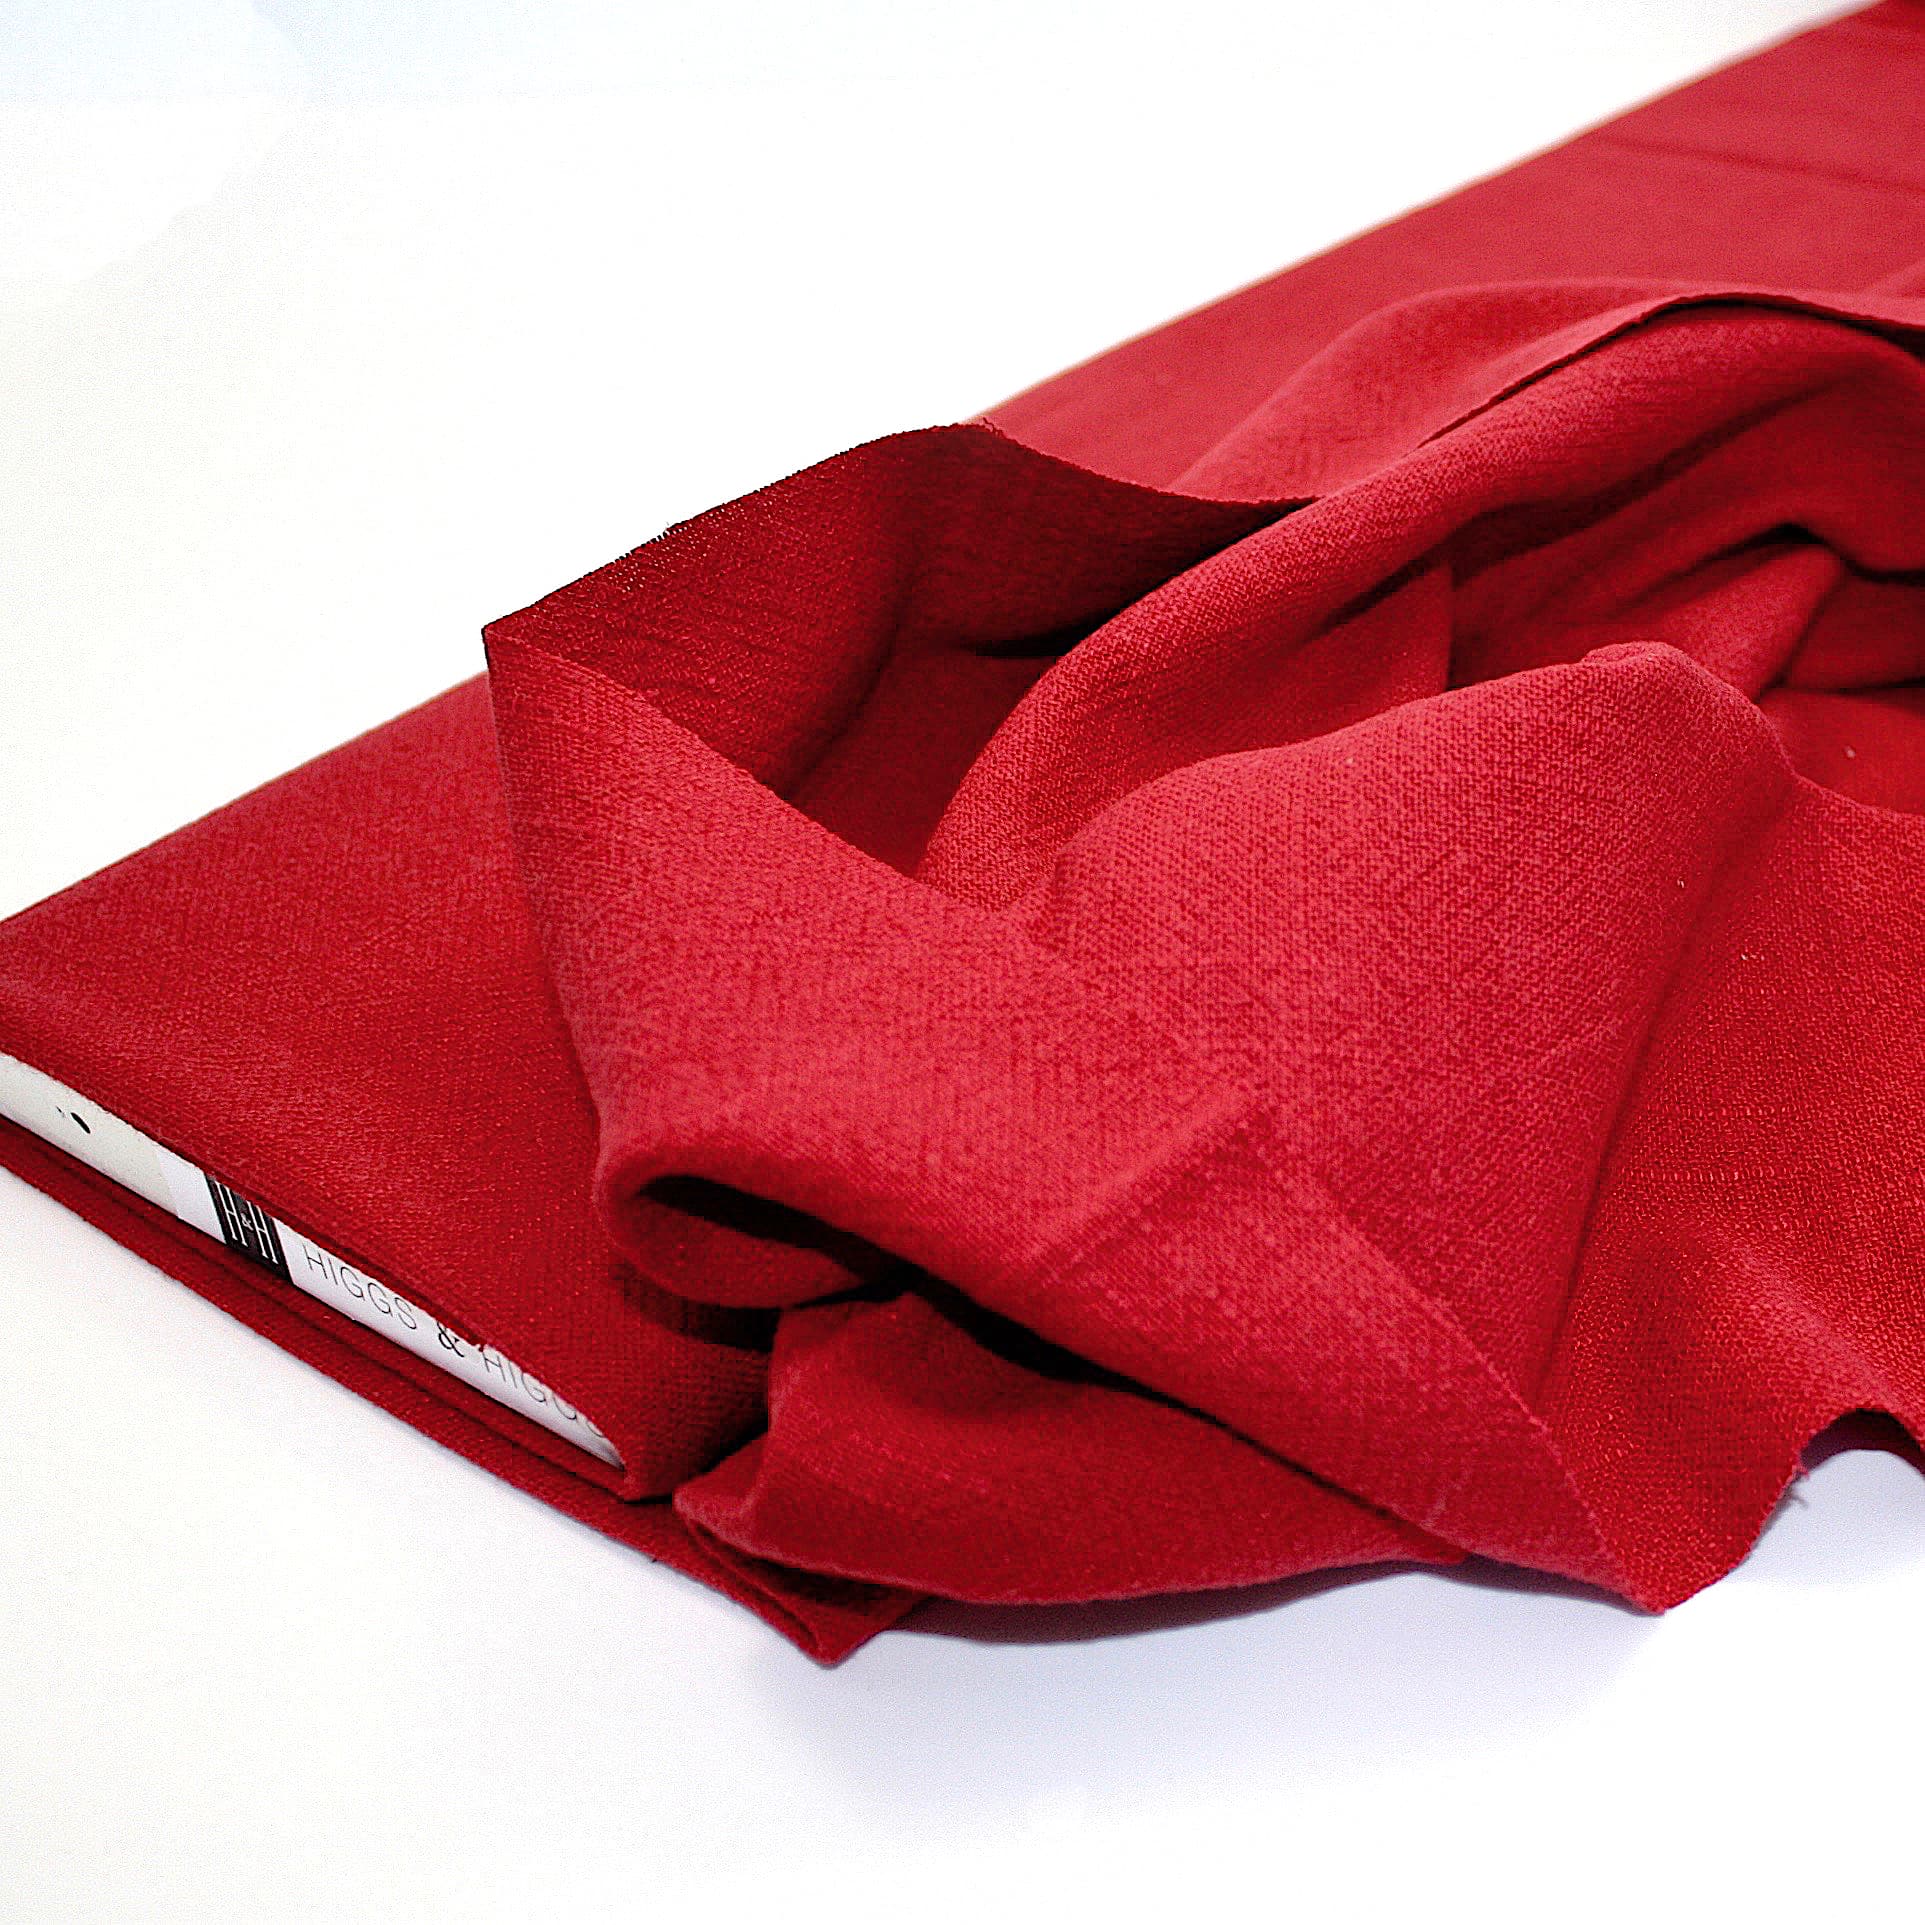 Stone Washed Dressmaking Linen Fabric Blend in Rich Red